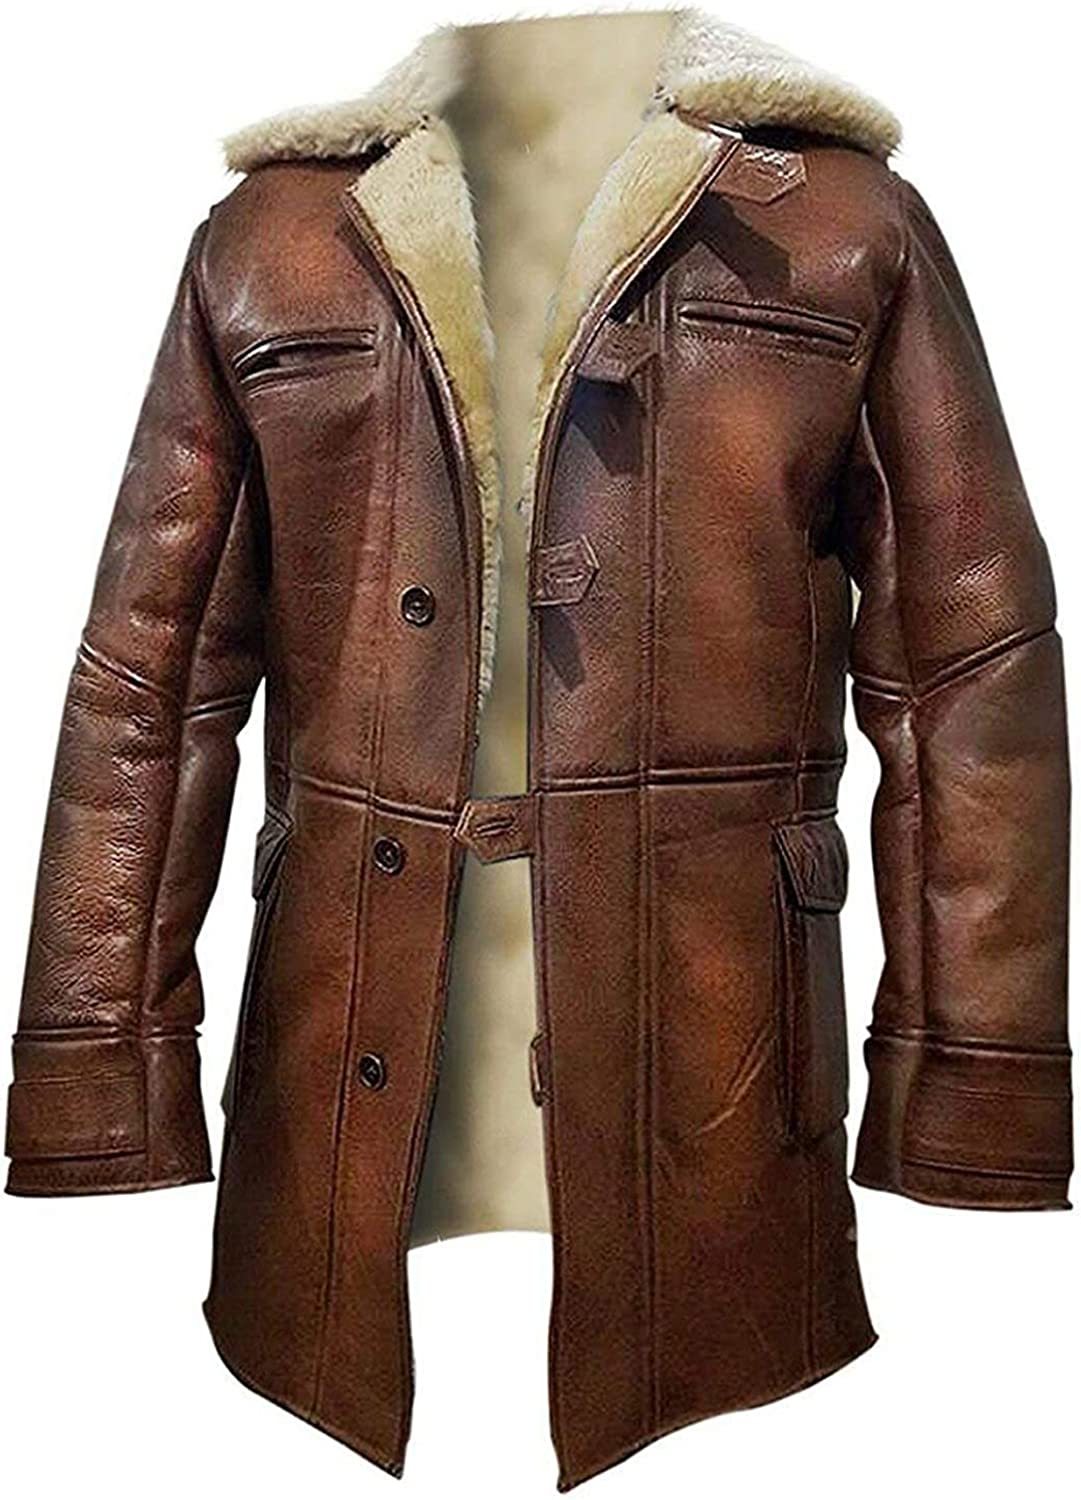 Bane Dark Knight Rises Cosplay Costume Brown Leather Fur Shearling Trench Coat